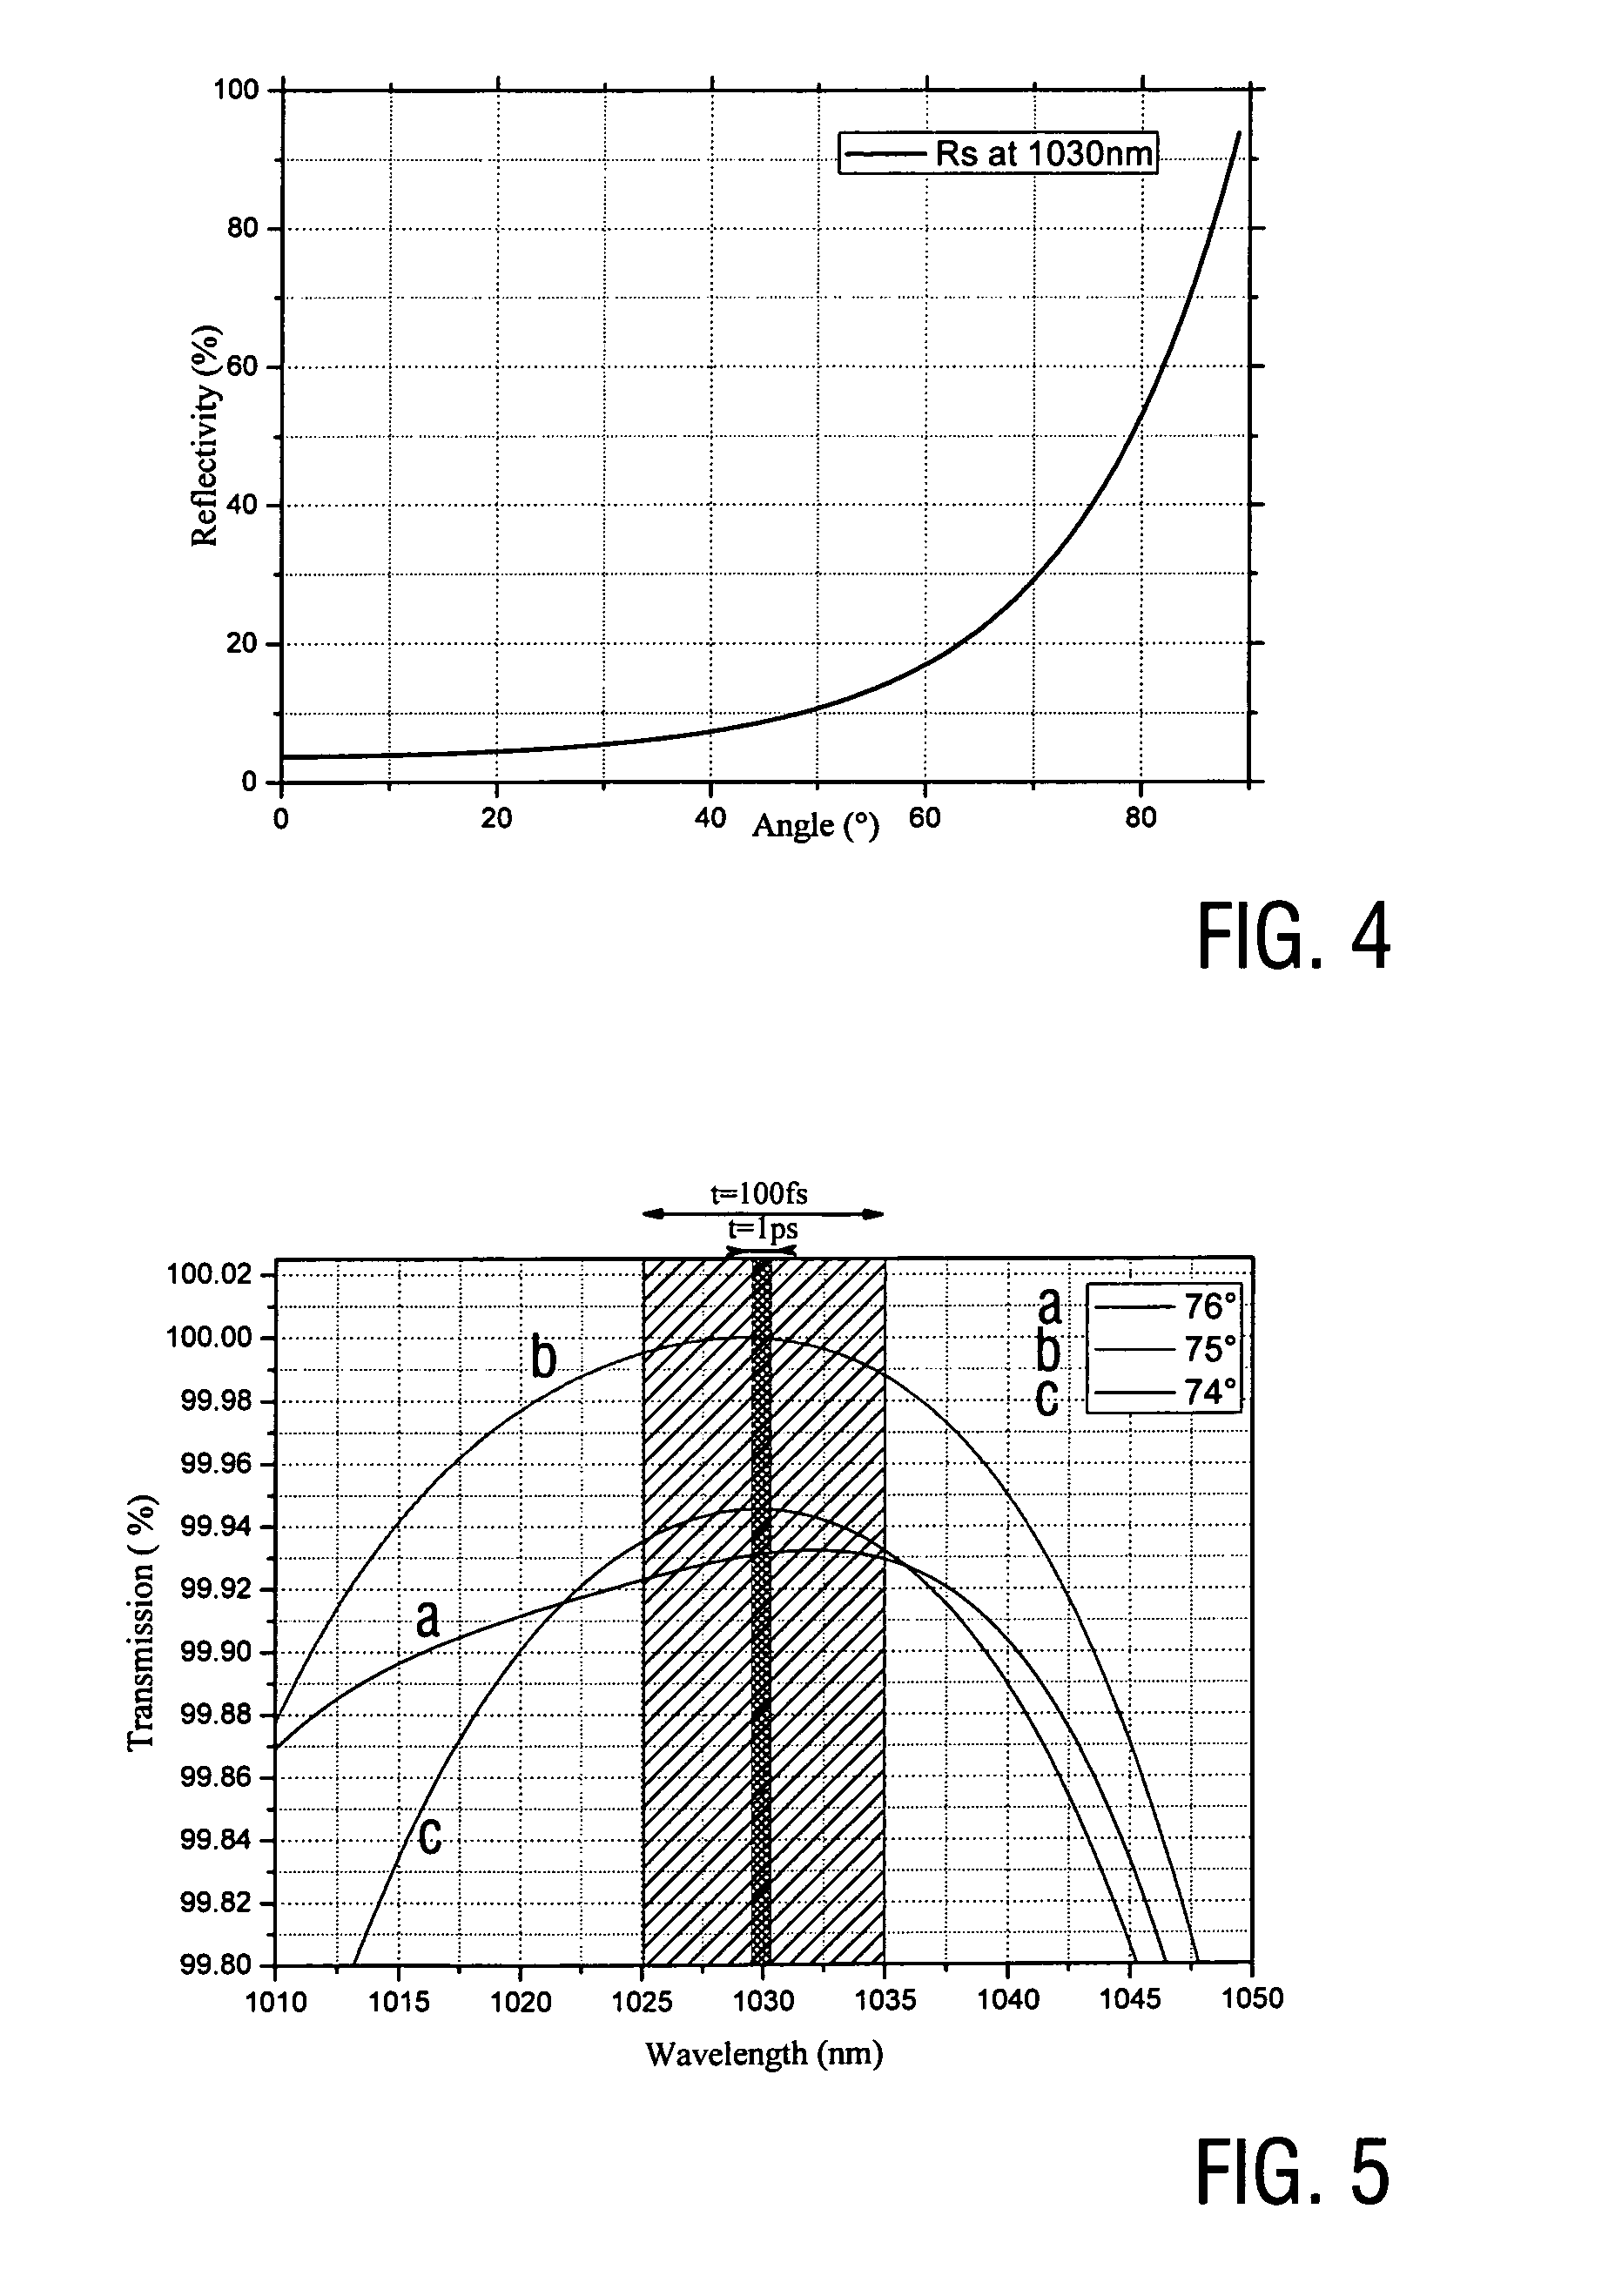 Spatially relaying radiation components